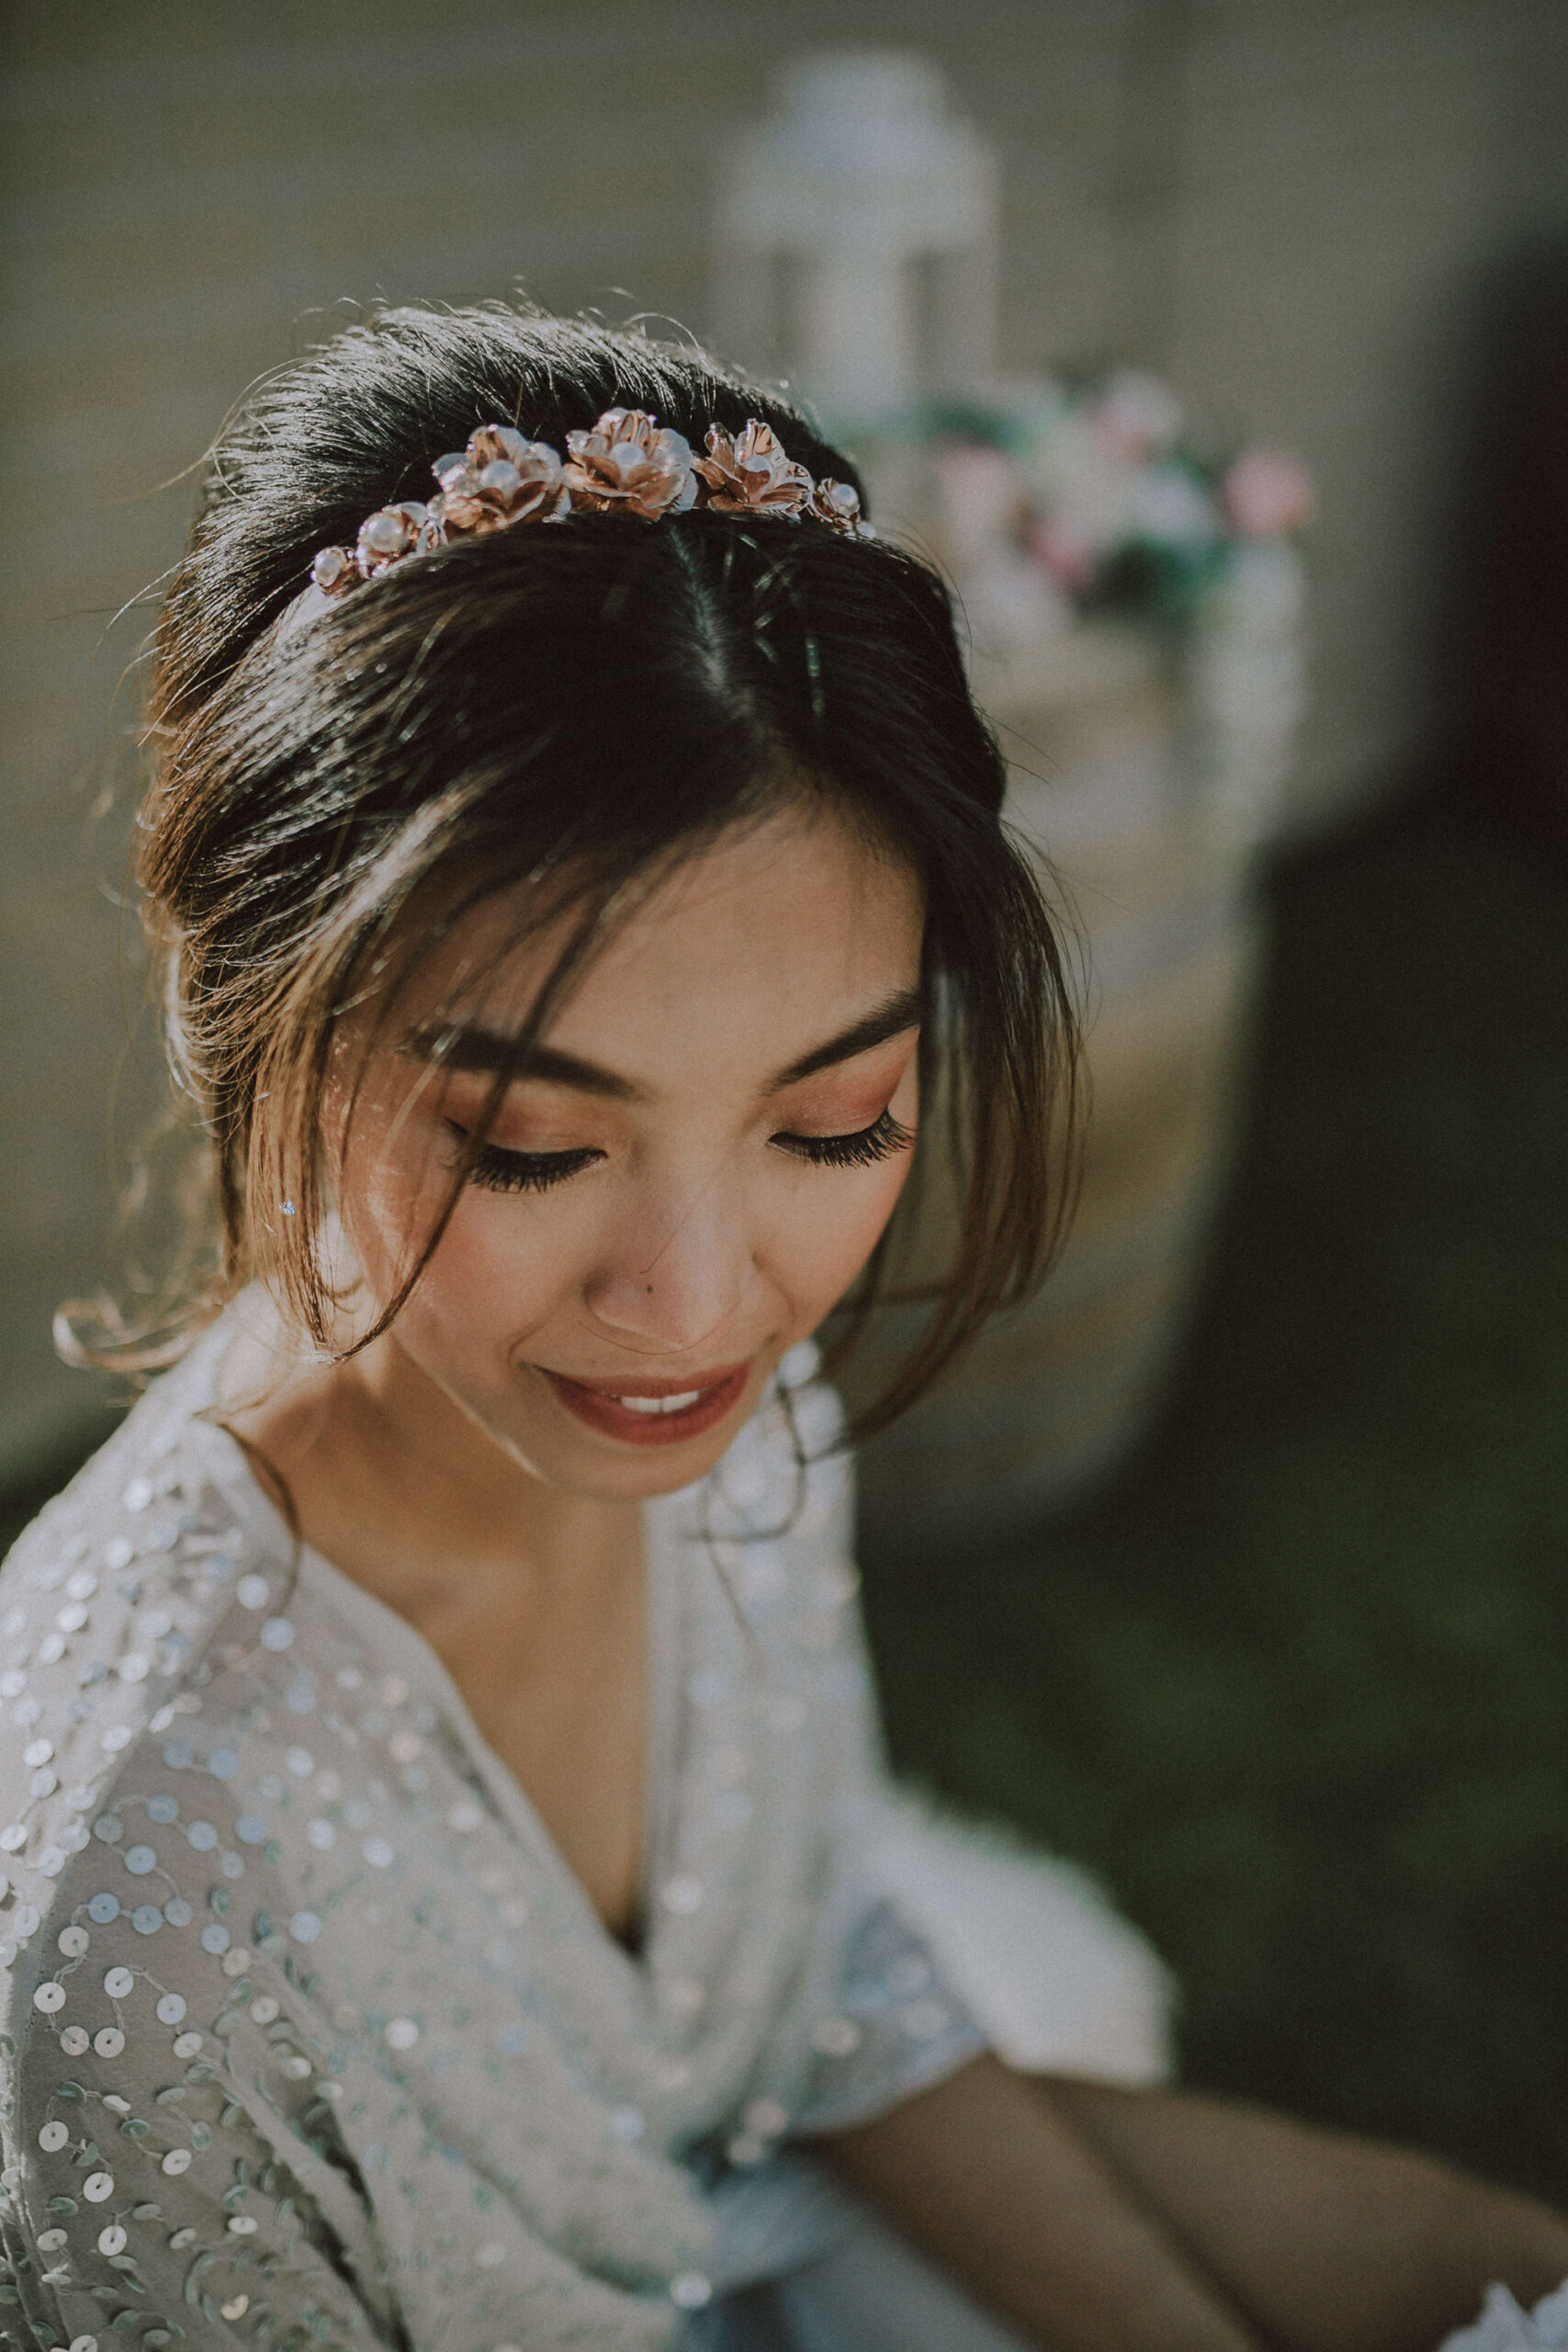 Inah James Rustic Garden Wedding Lovable Photography SBS 18 scaled